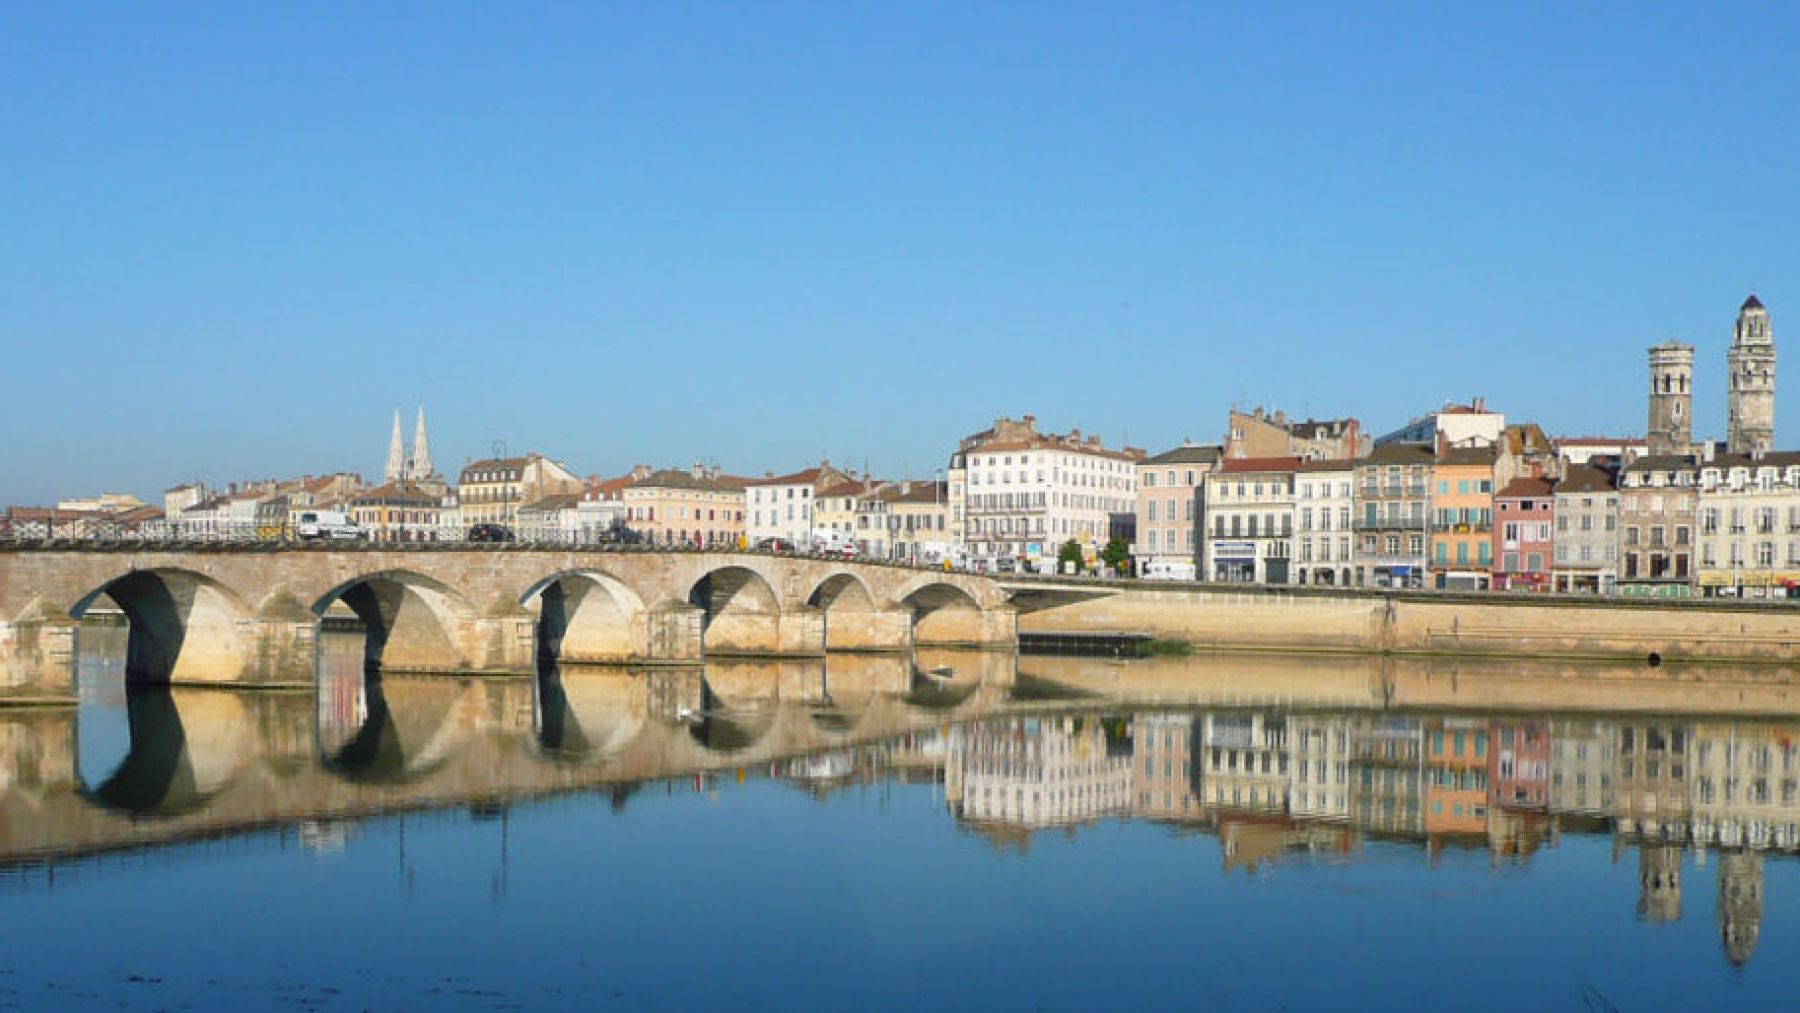 Guided tours and excursions in the Mâconnais region